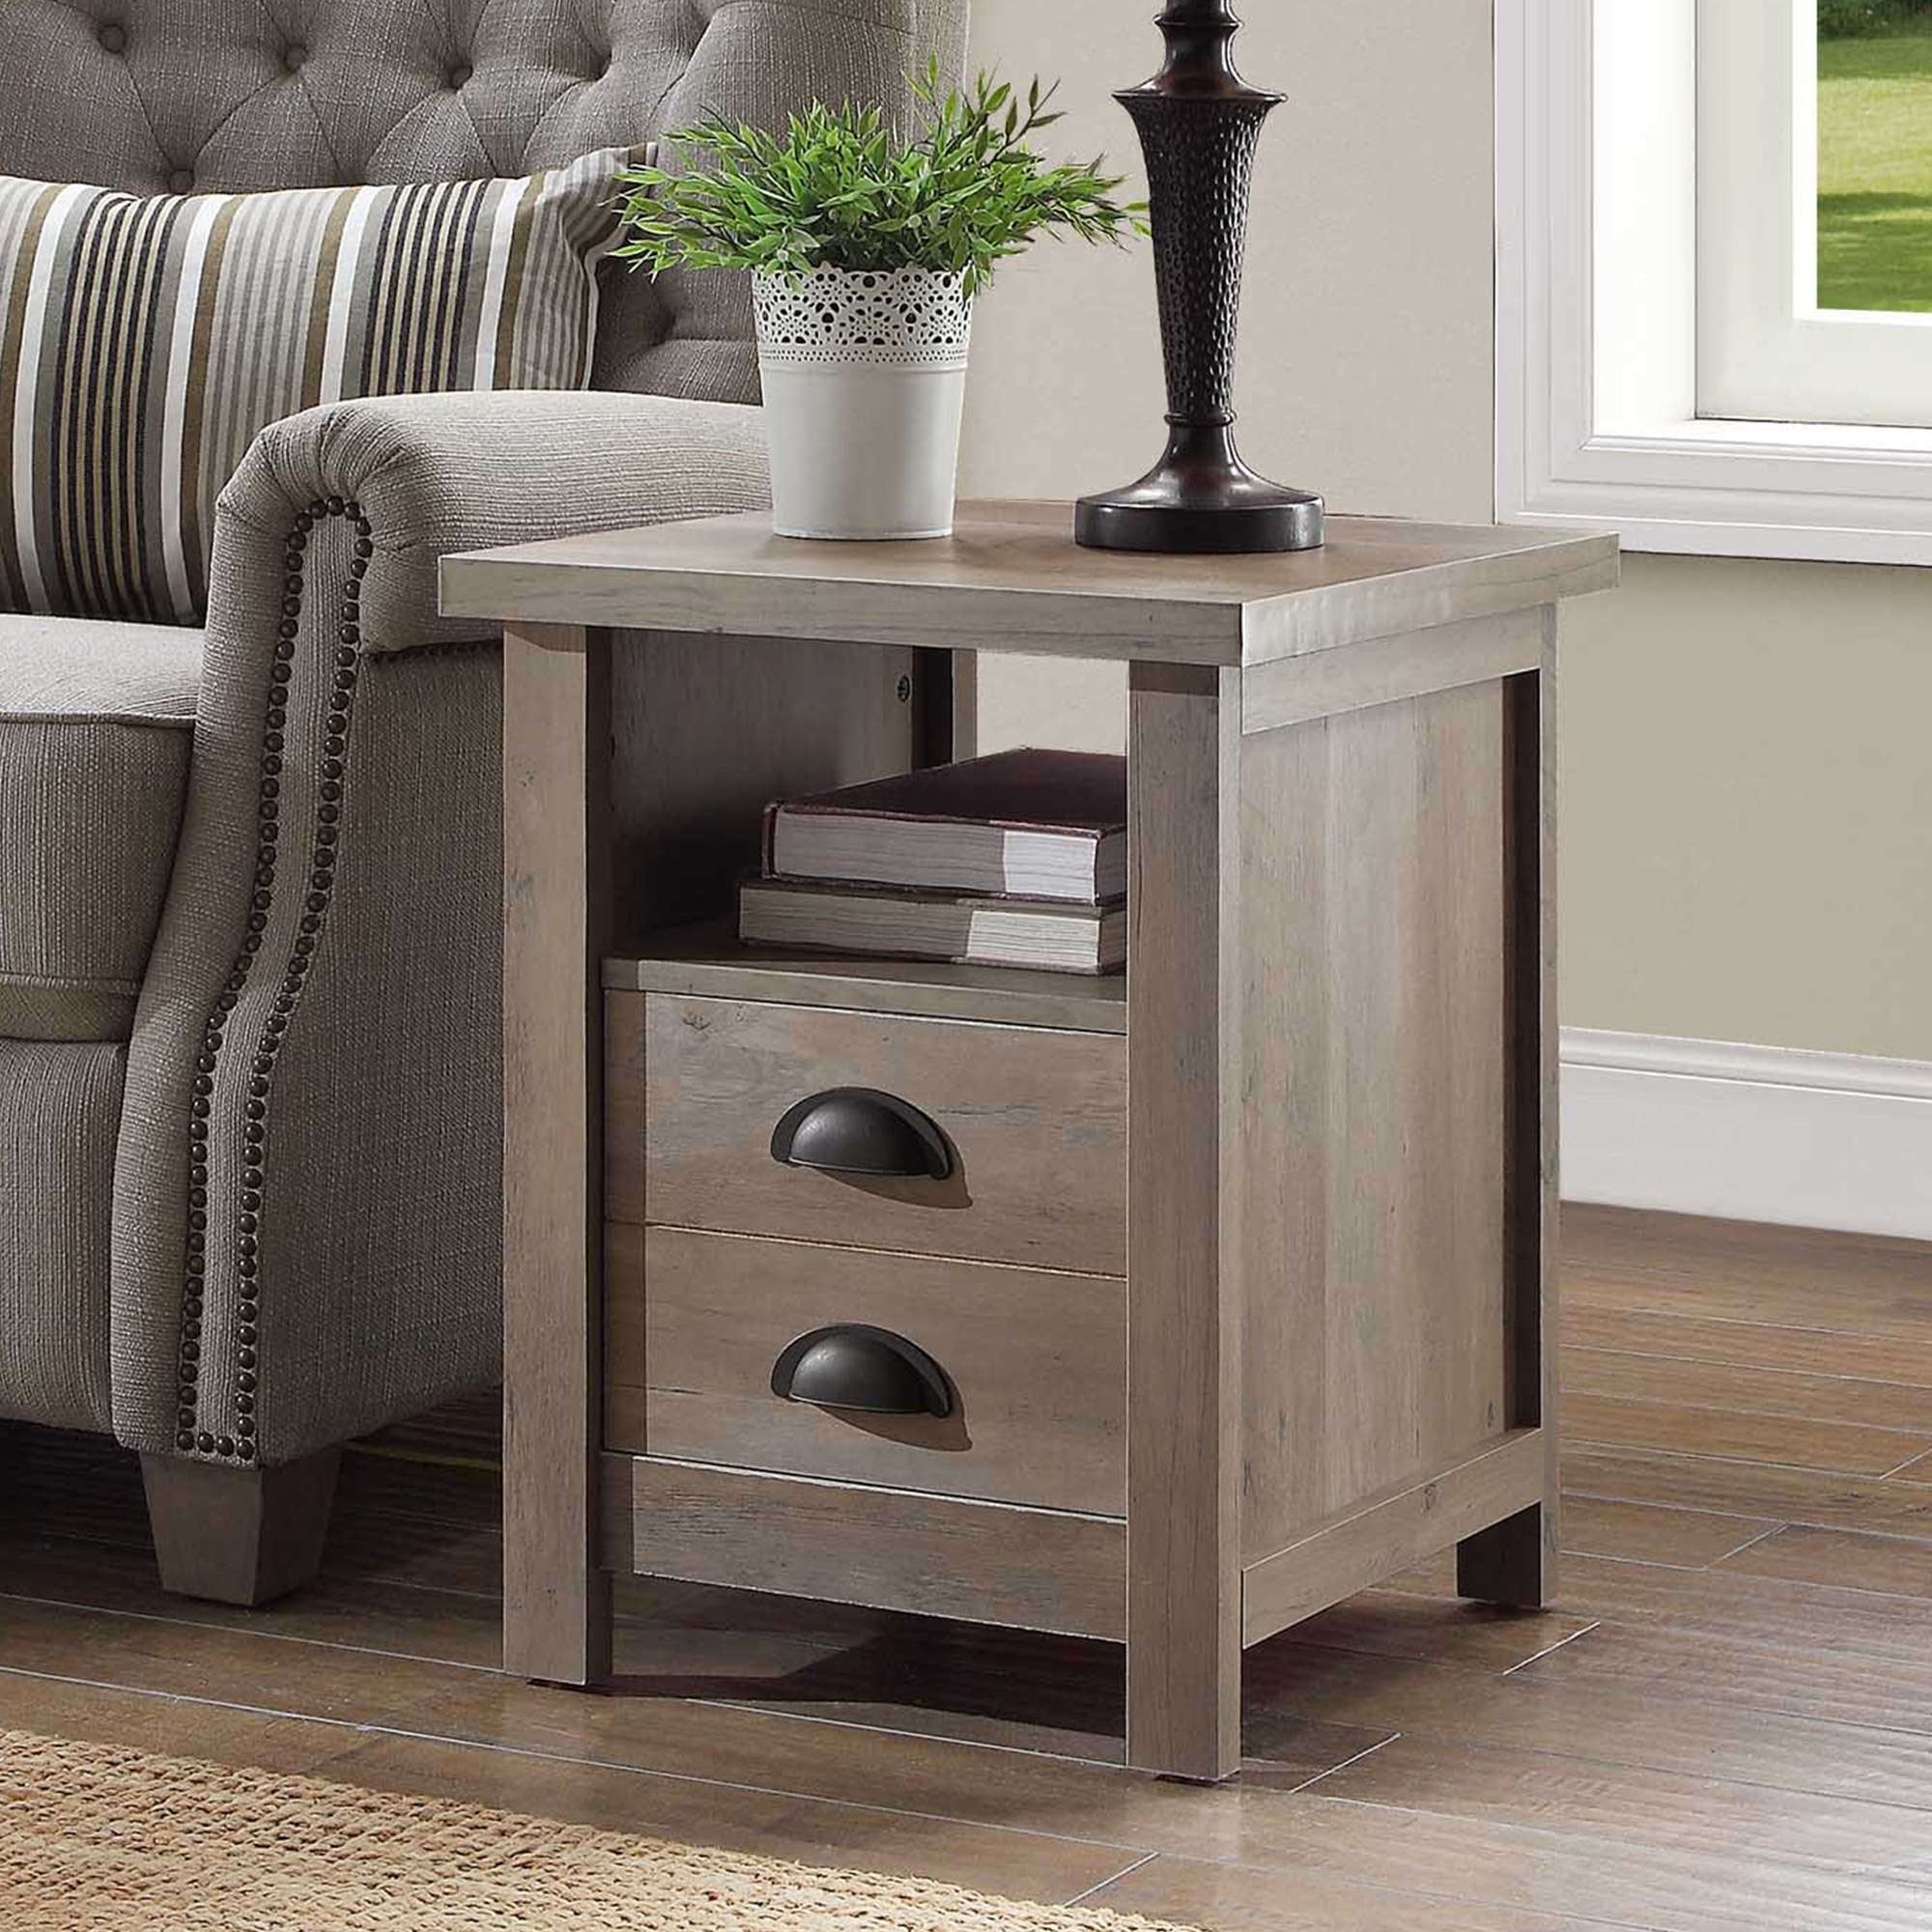 Homes And Gardens Granary Modern Farmhouse End Table Rustic Gray Pertaining To Rustic Gray End Tables (View 5 of 15)